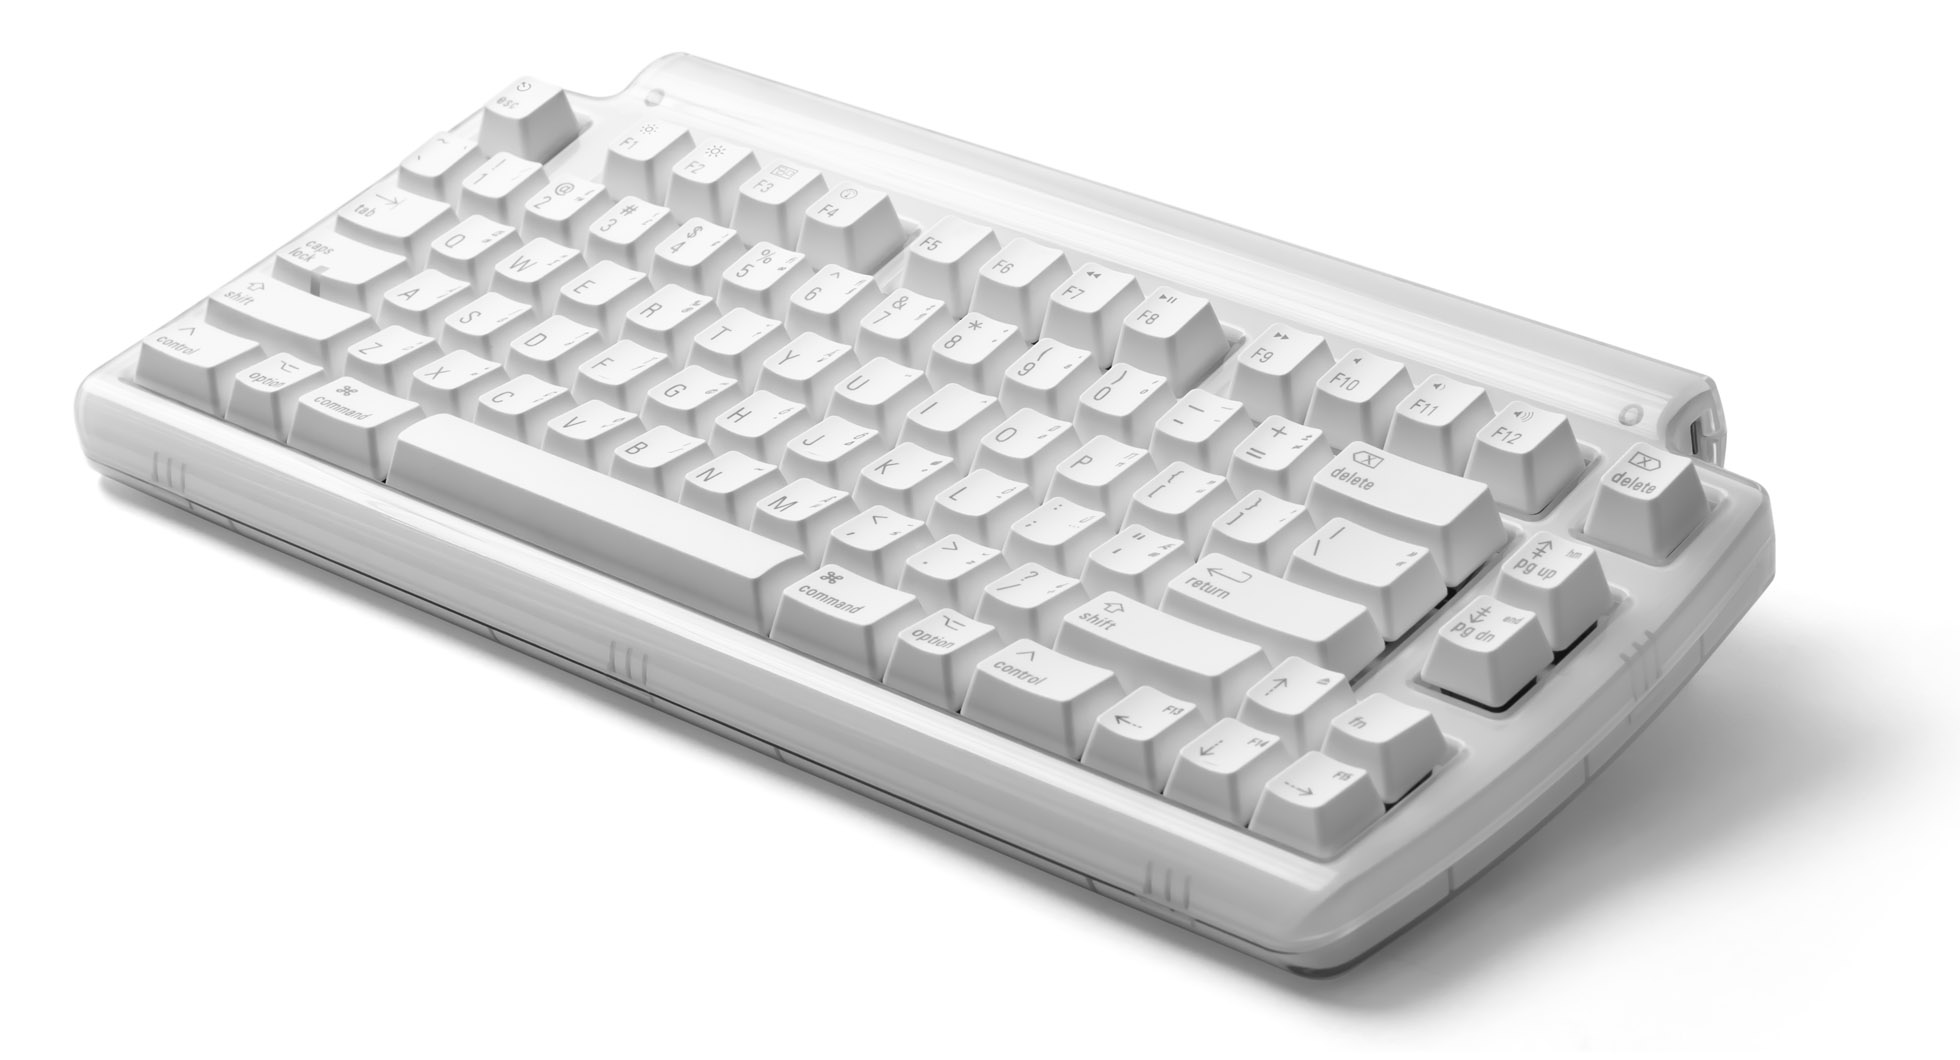 keyboards for mac and windows